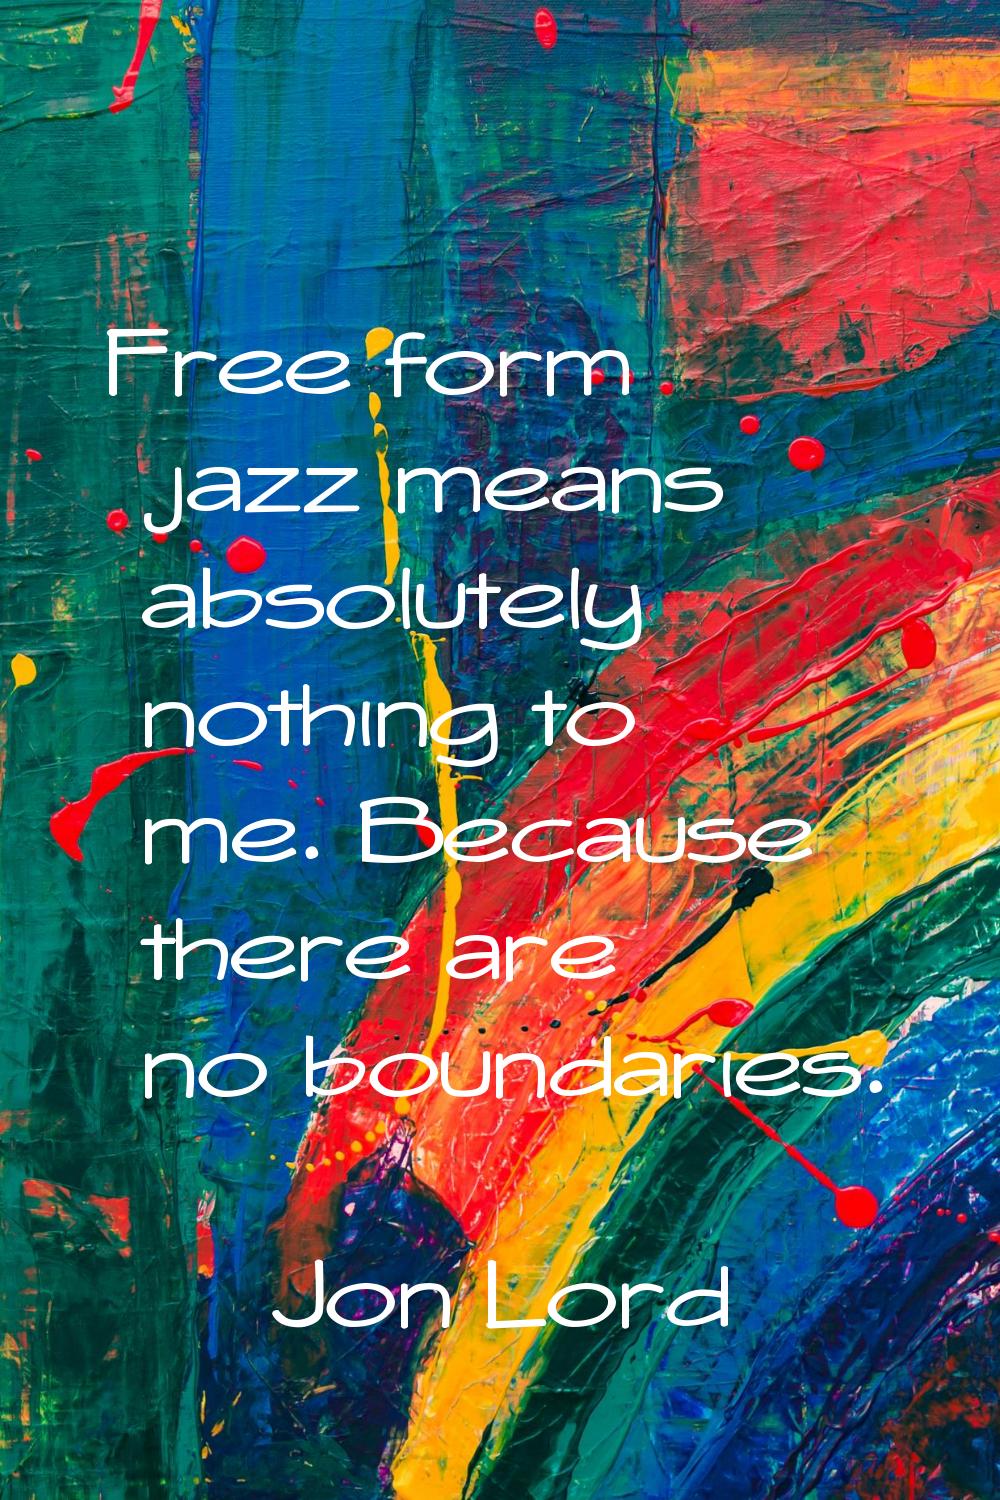 Free form jazz means absolutely nothing to me. Because there are no boundaries.